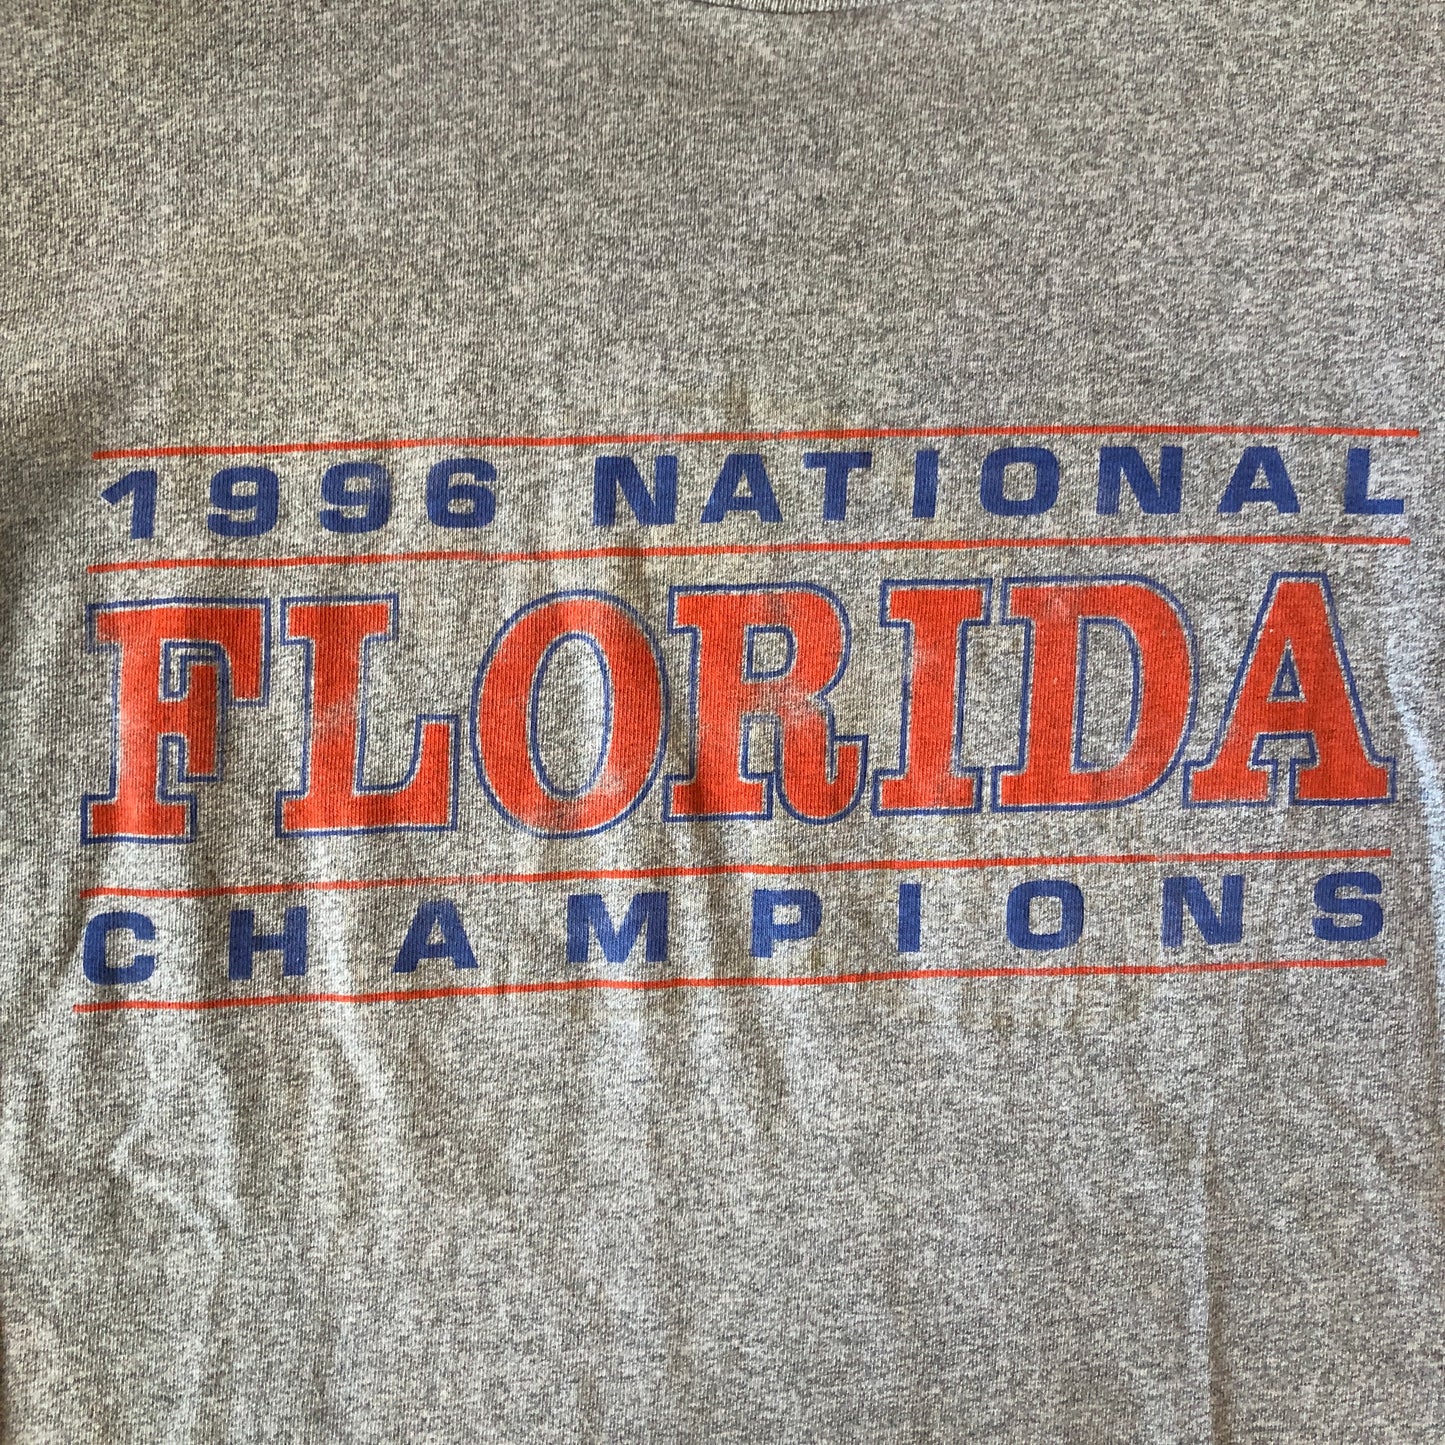 UF 1996 National Champs Vintage Tee